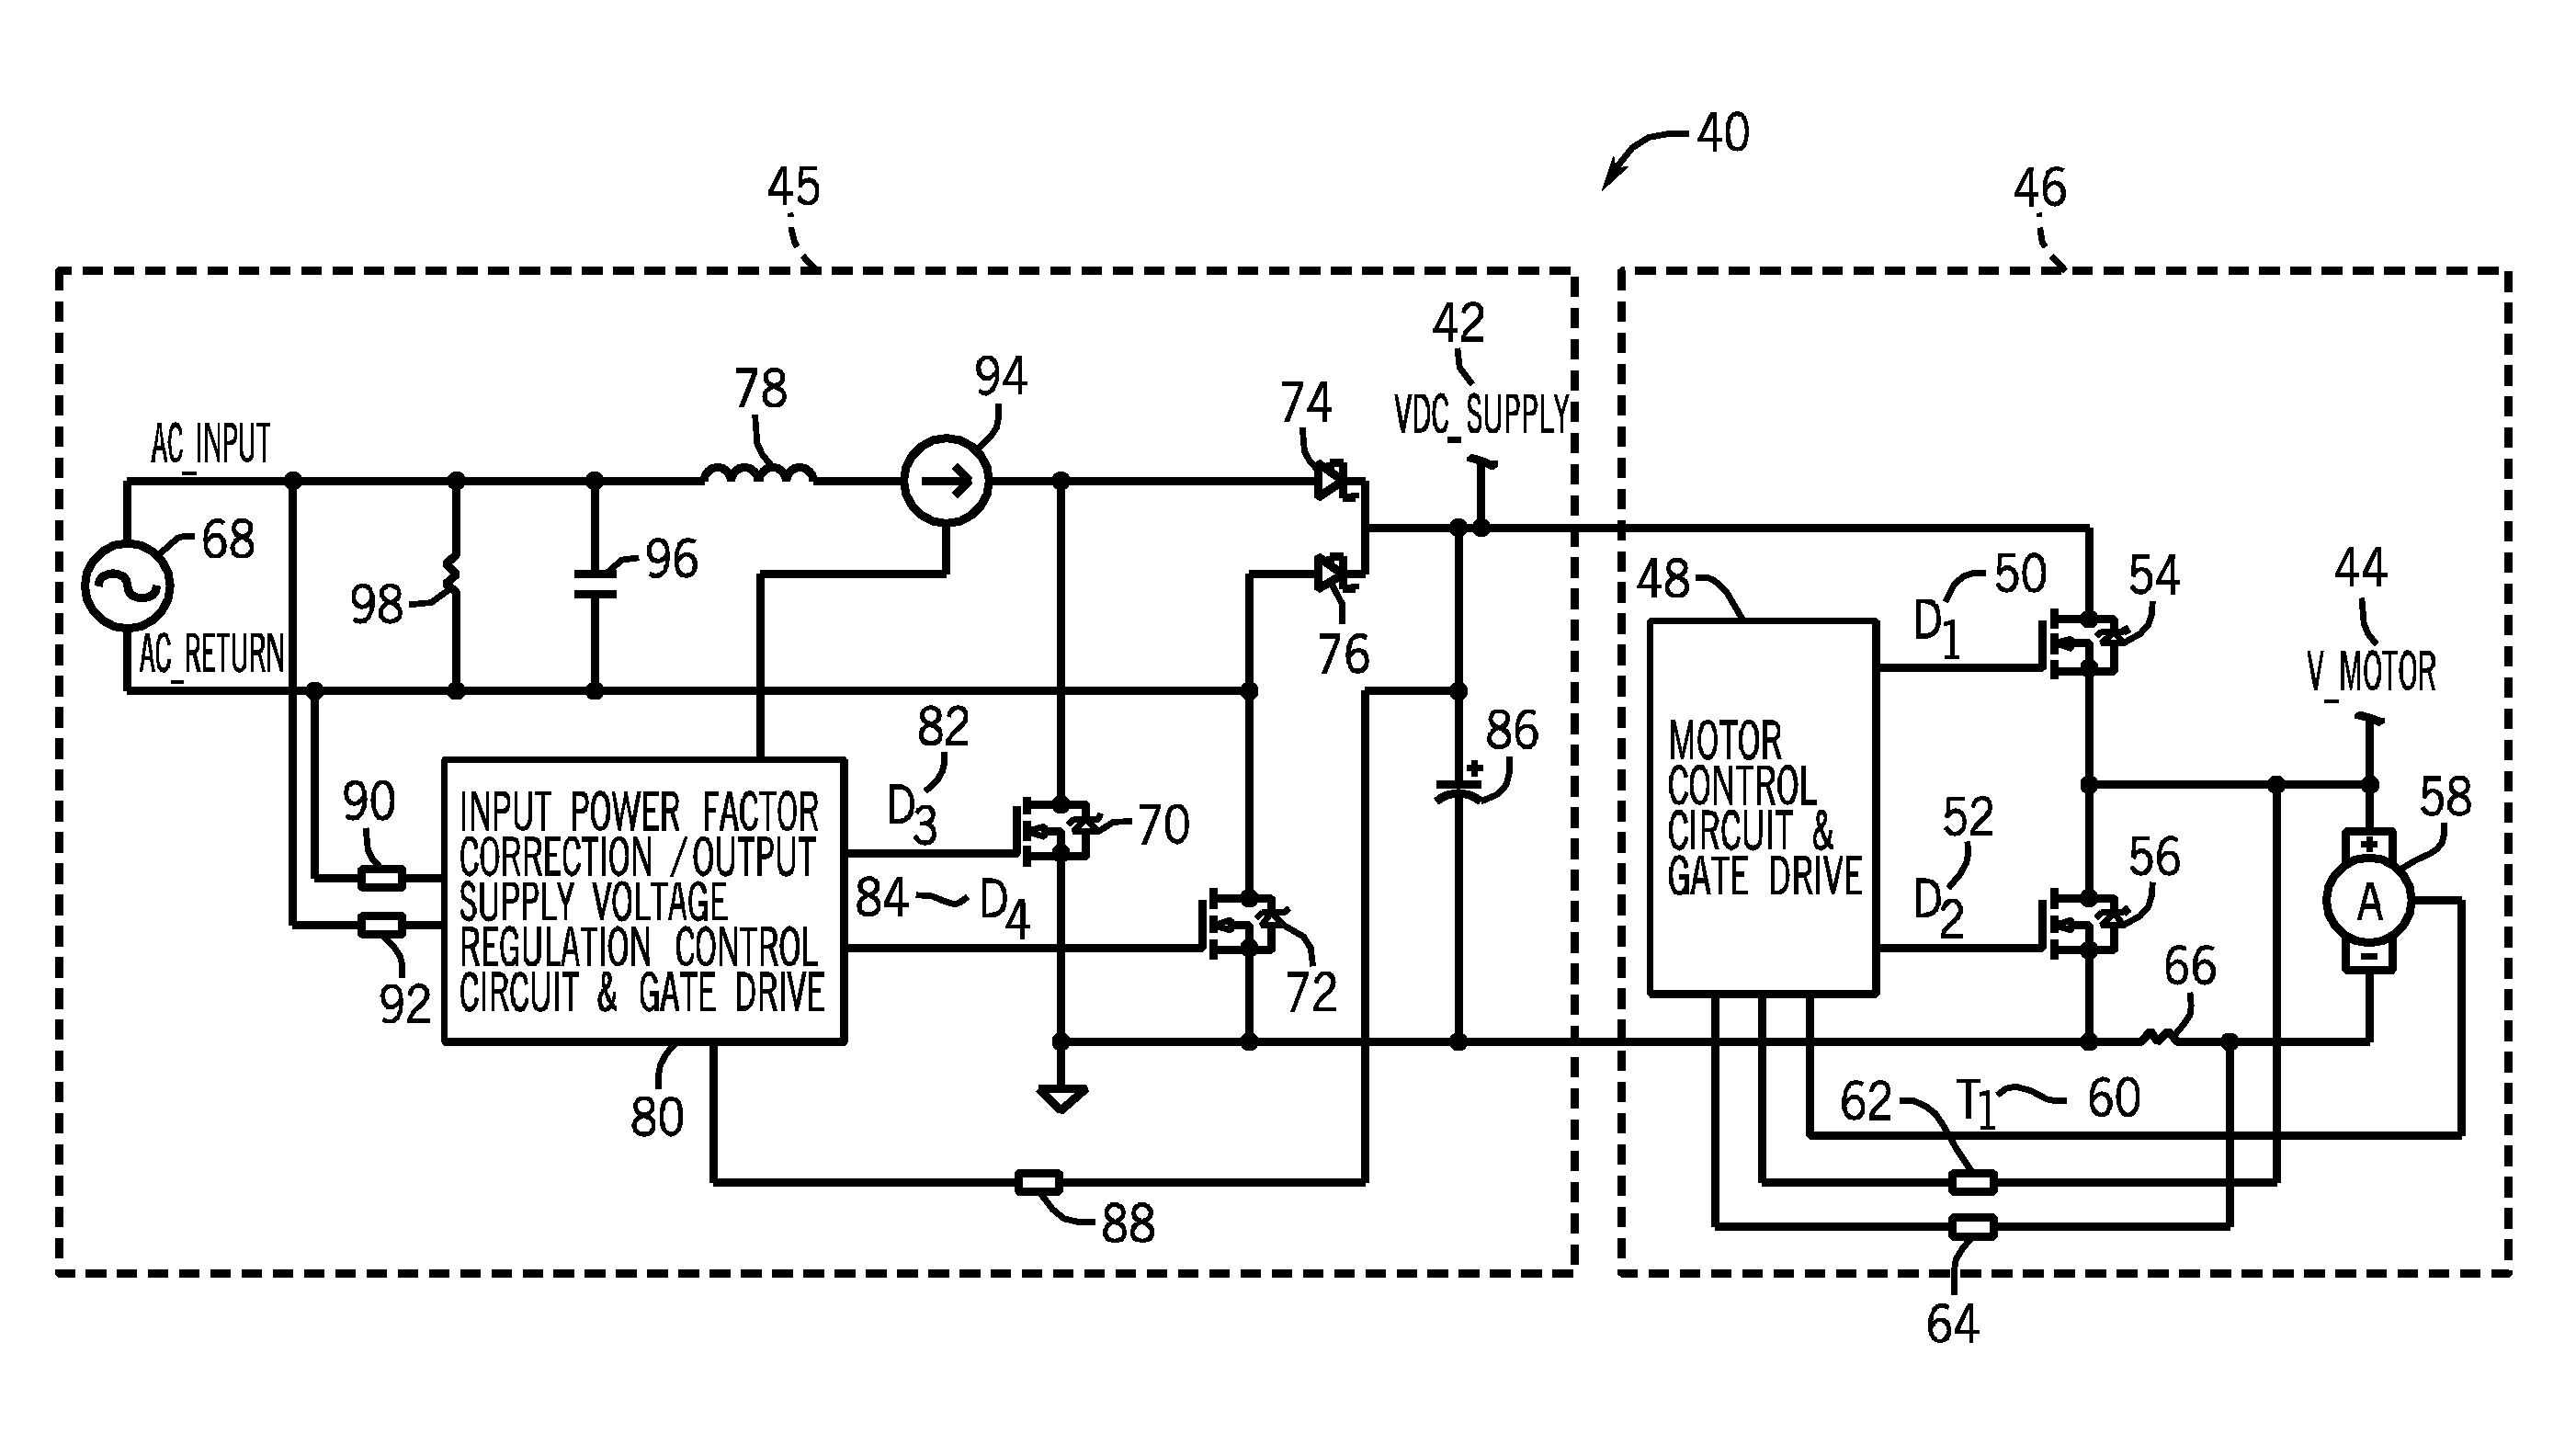 Voltage regulated DC supply circuit for a wire feed drive system